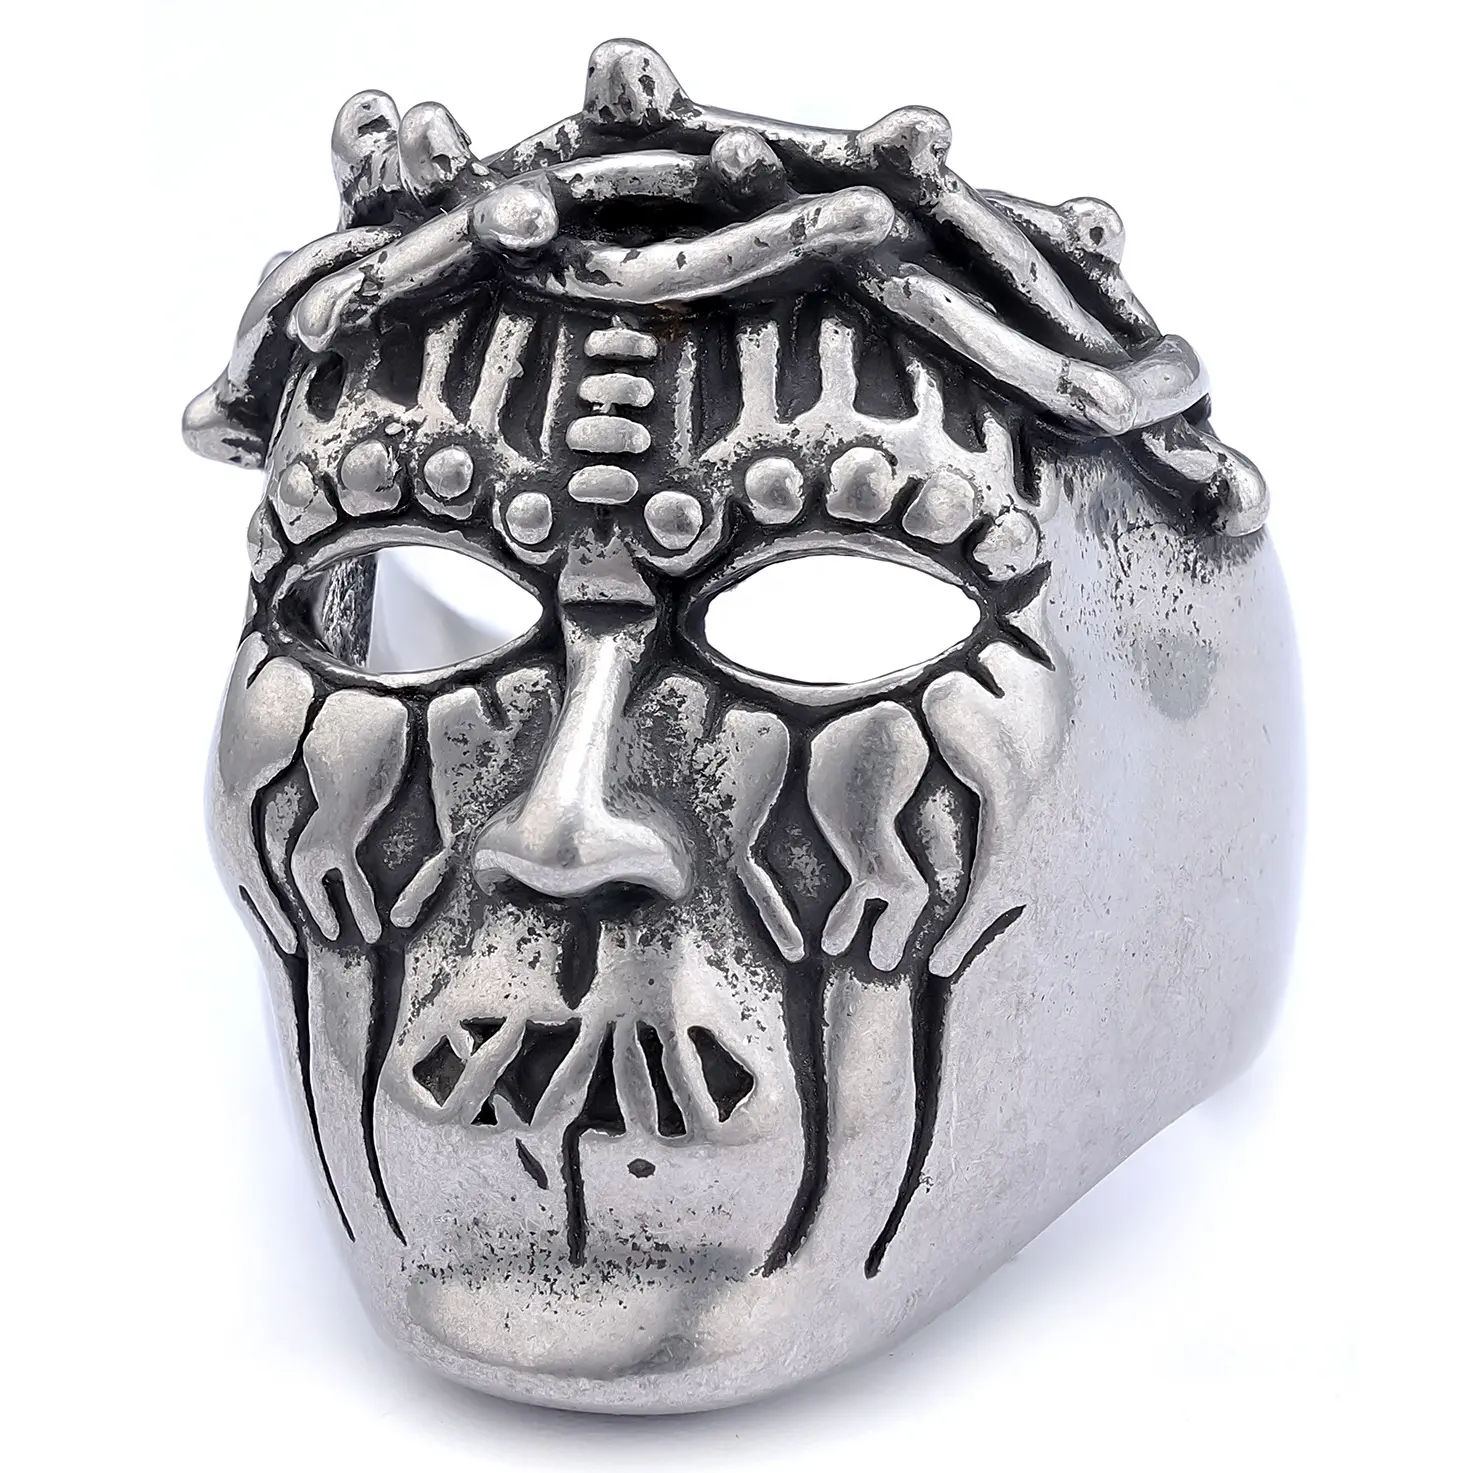 New Arrival Stainless Steel Fashionable Movies Face Stainless Steel Mask Ring for Men Women Size 7-13